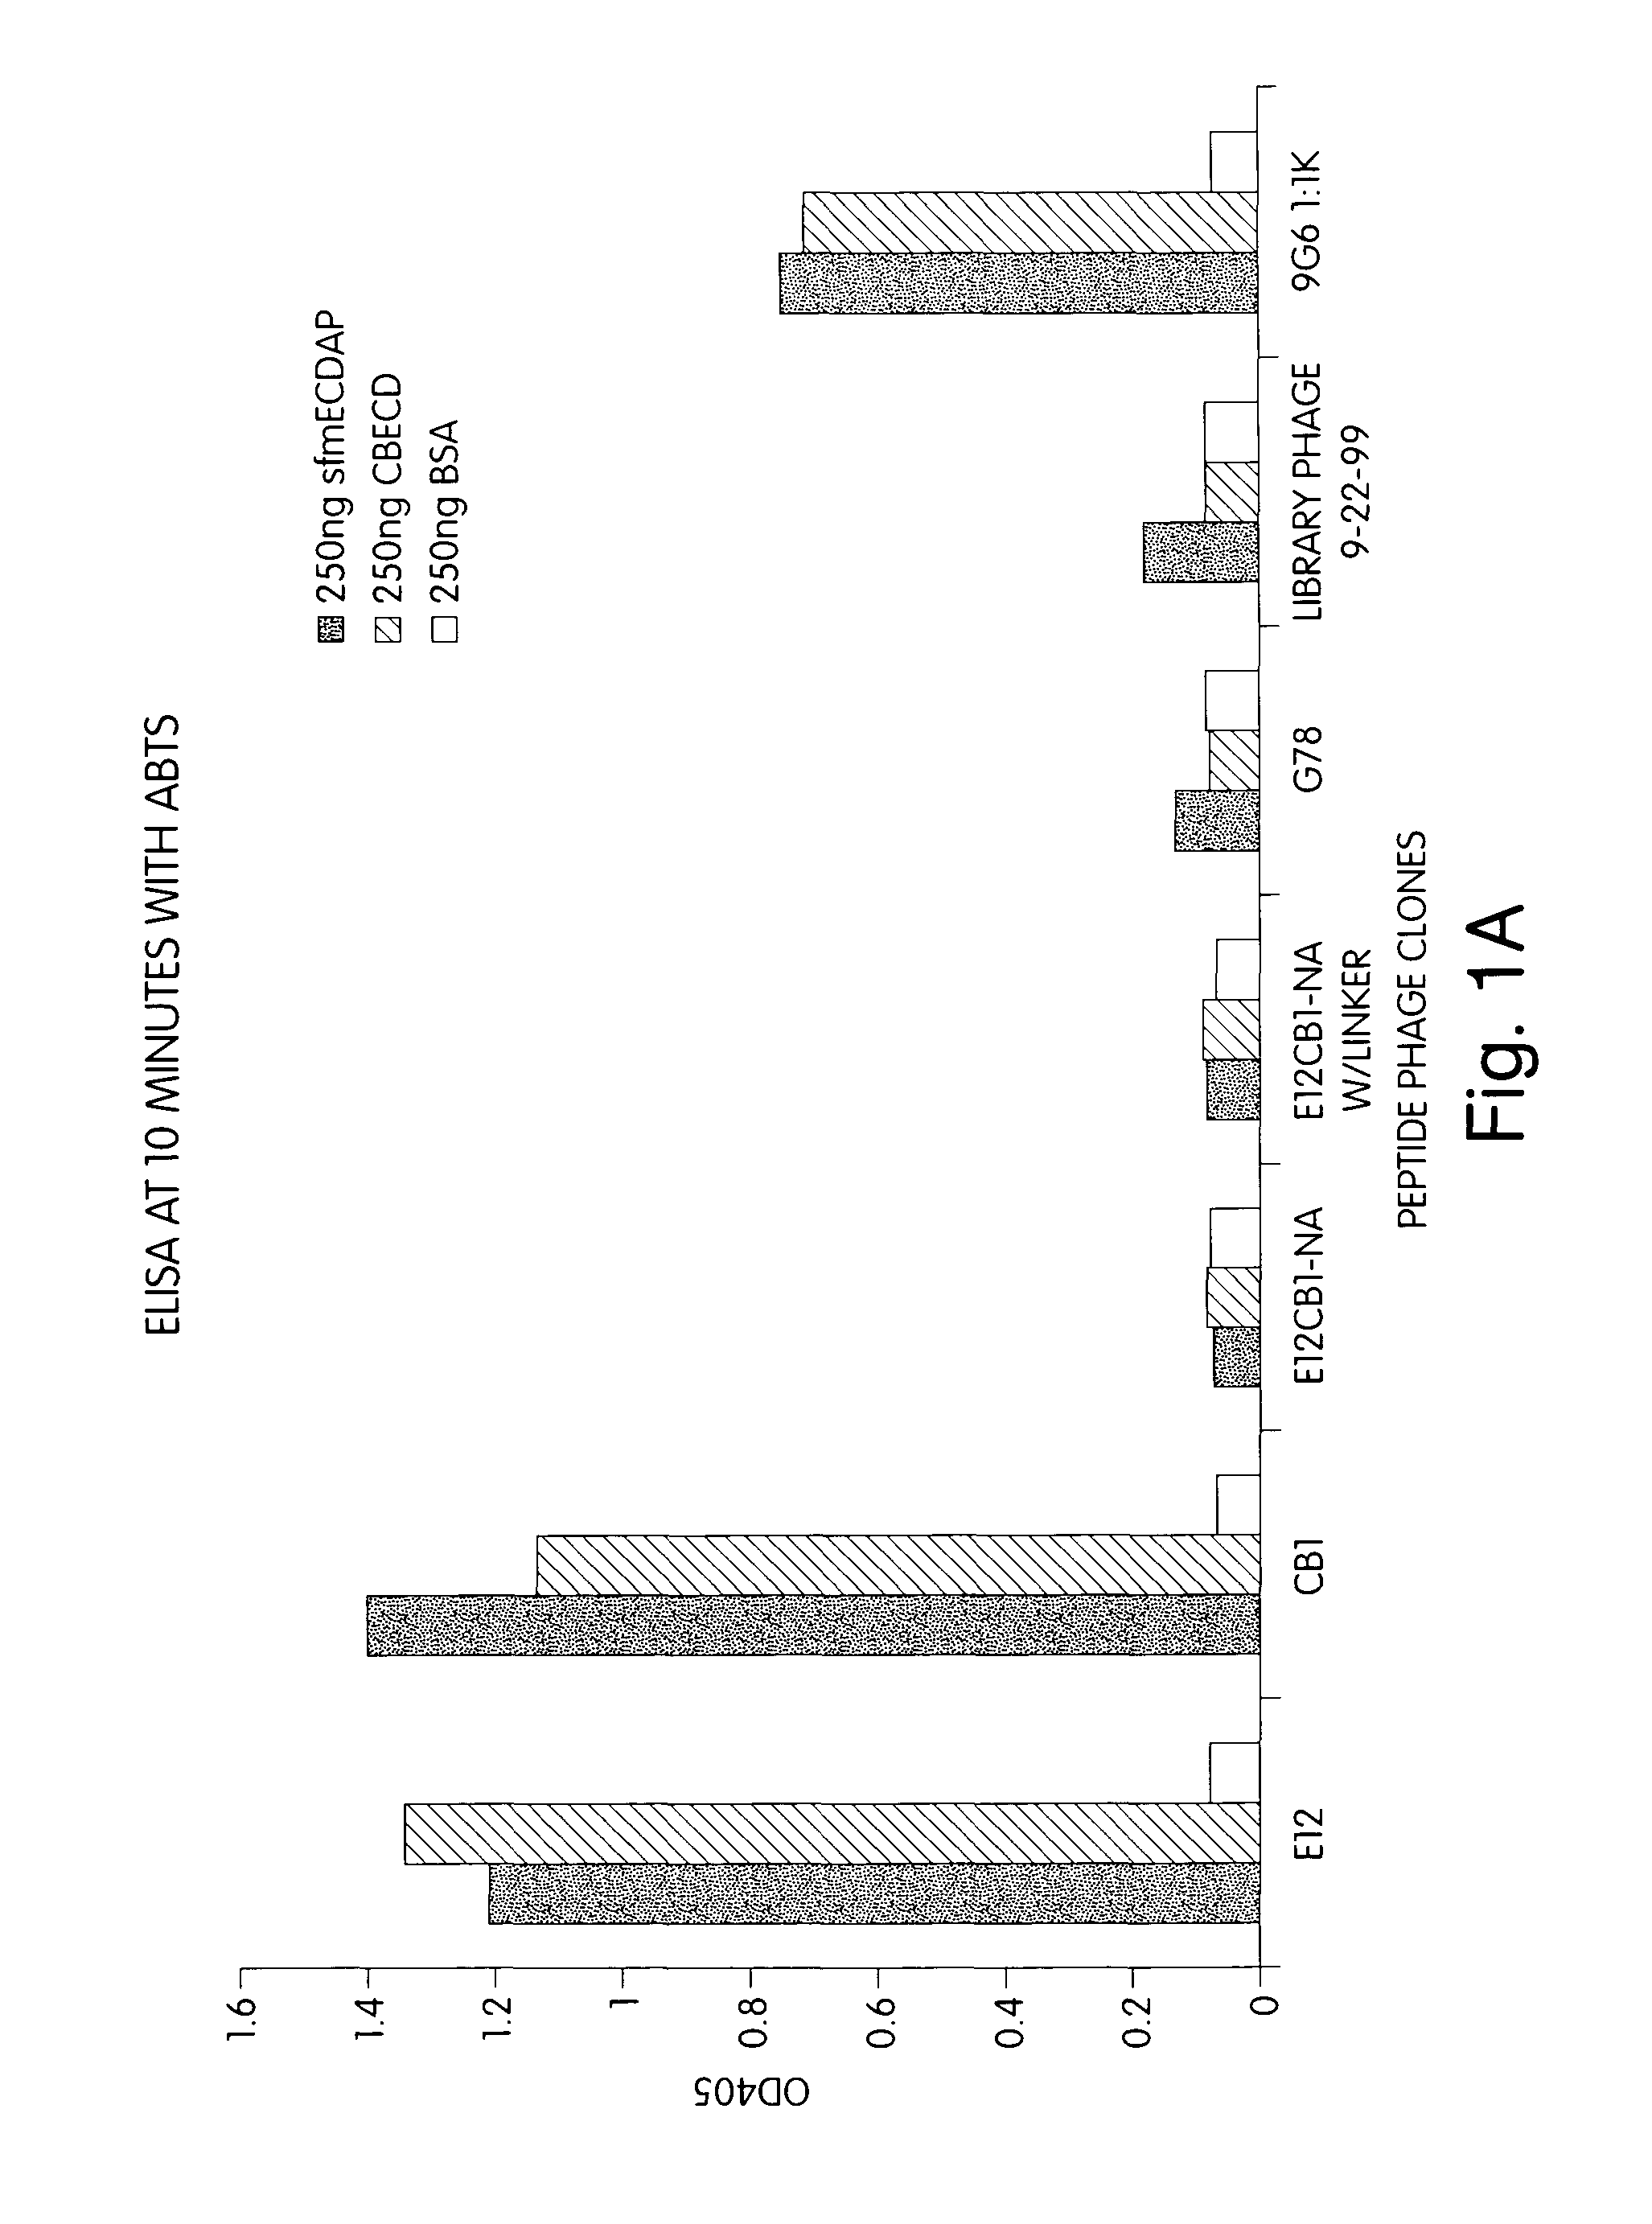 Binding peptides specific for the extracellular domain of ErbB2 and uses therefor